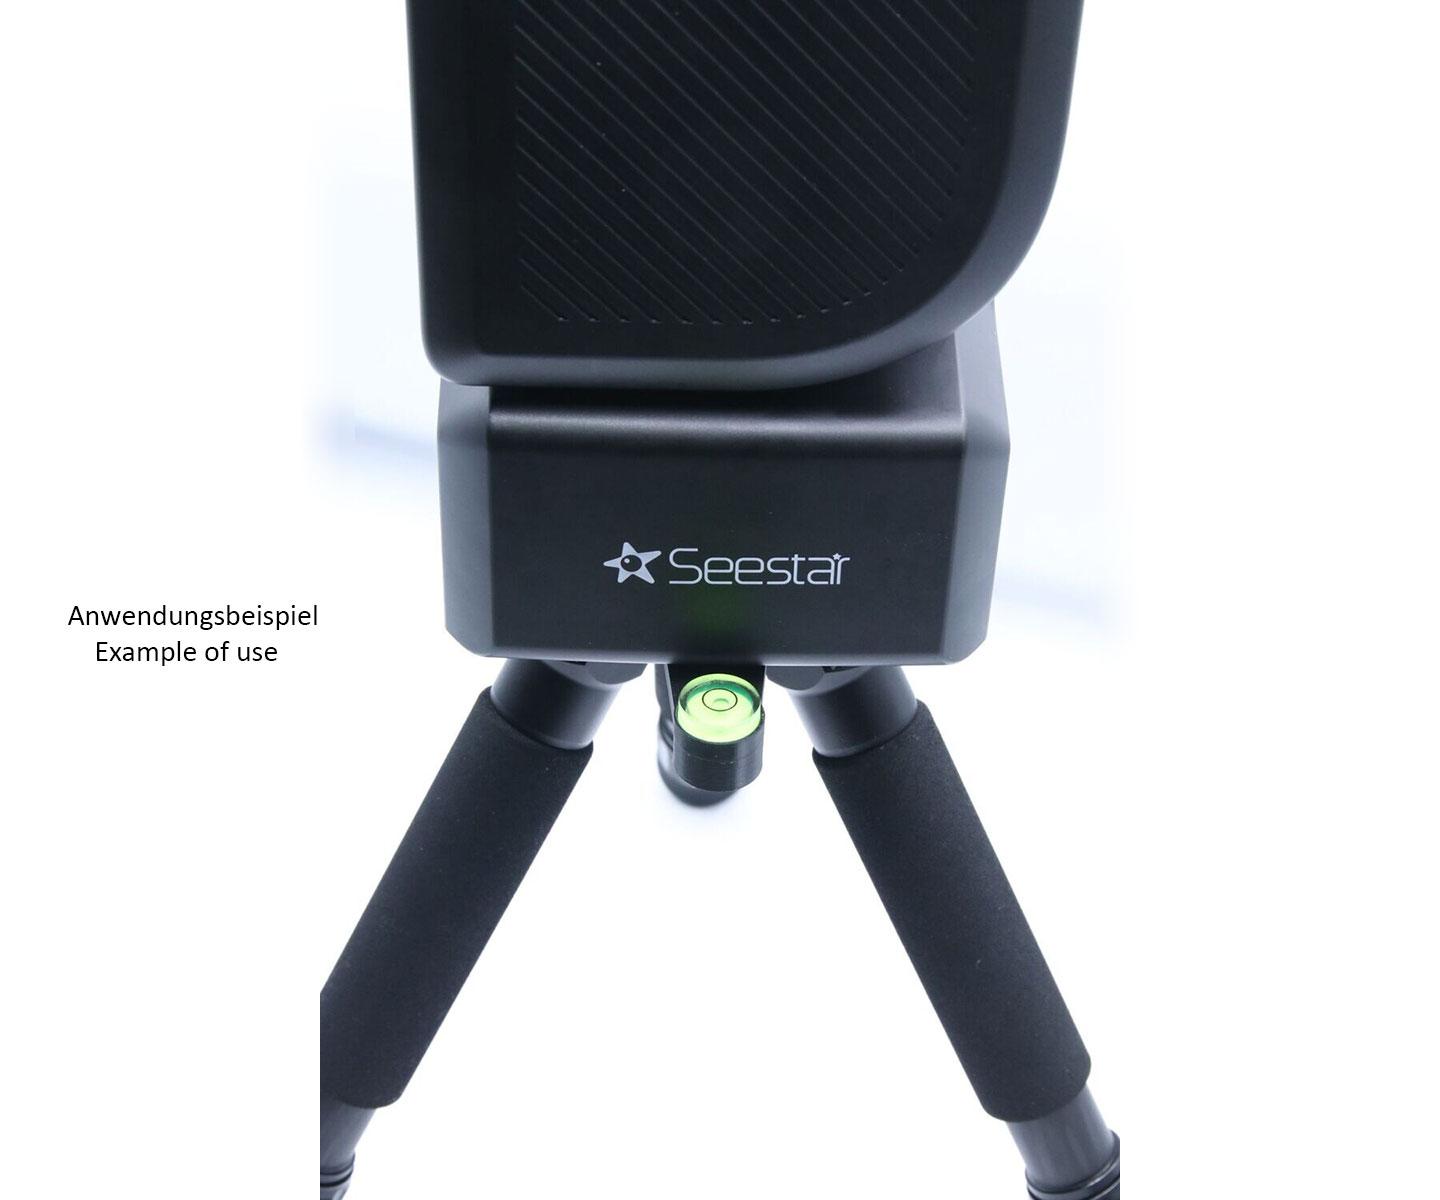  You can use this spirit level to level the tripod of the SeeStar S50 while the telescope is attached. [EN] 